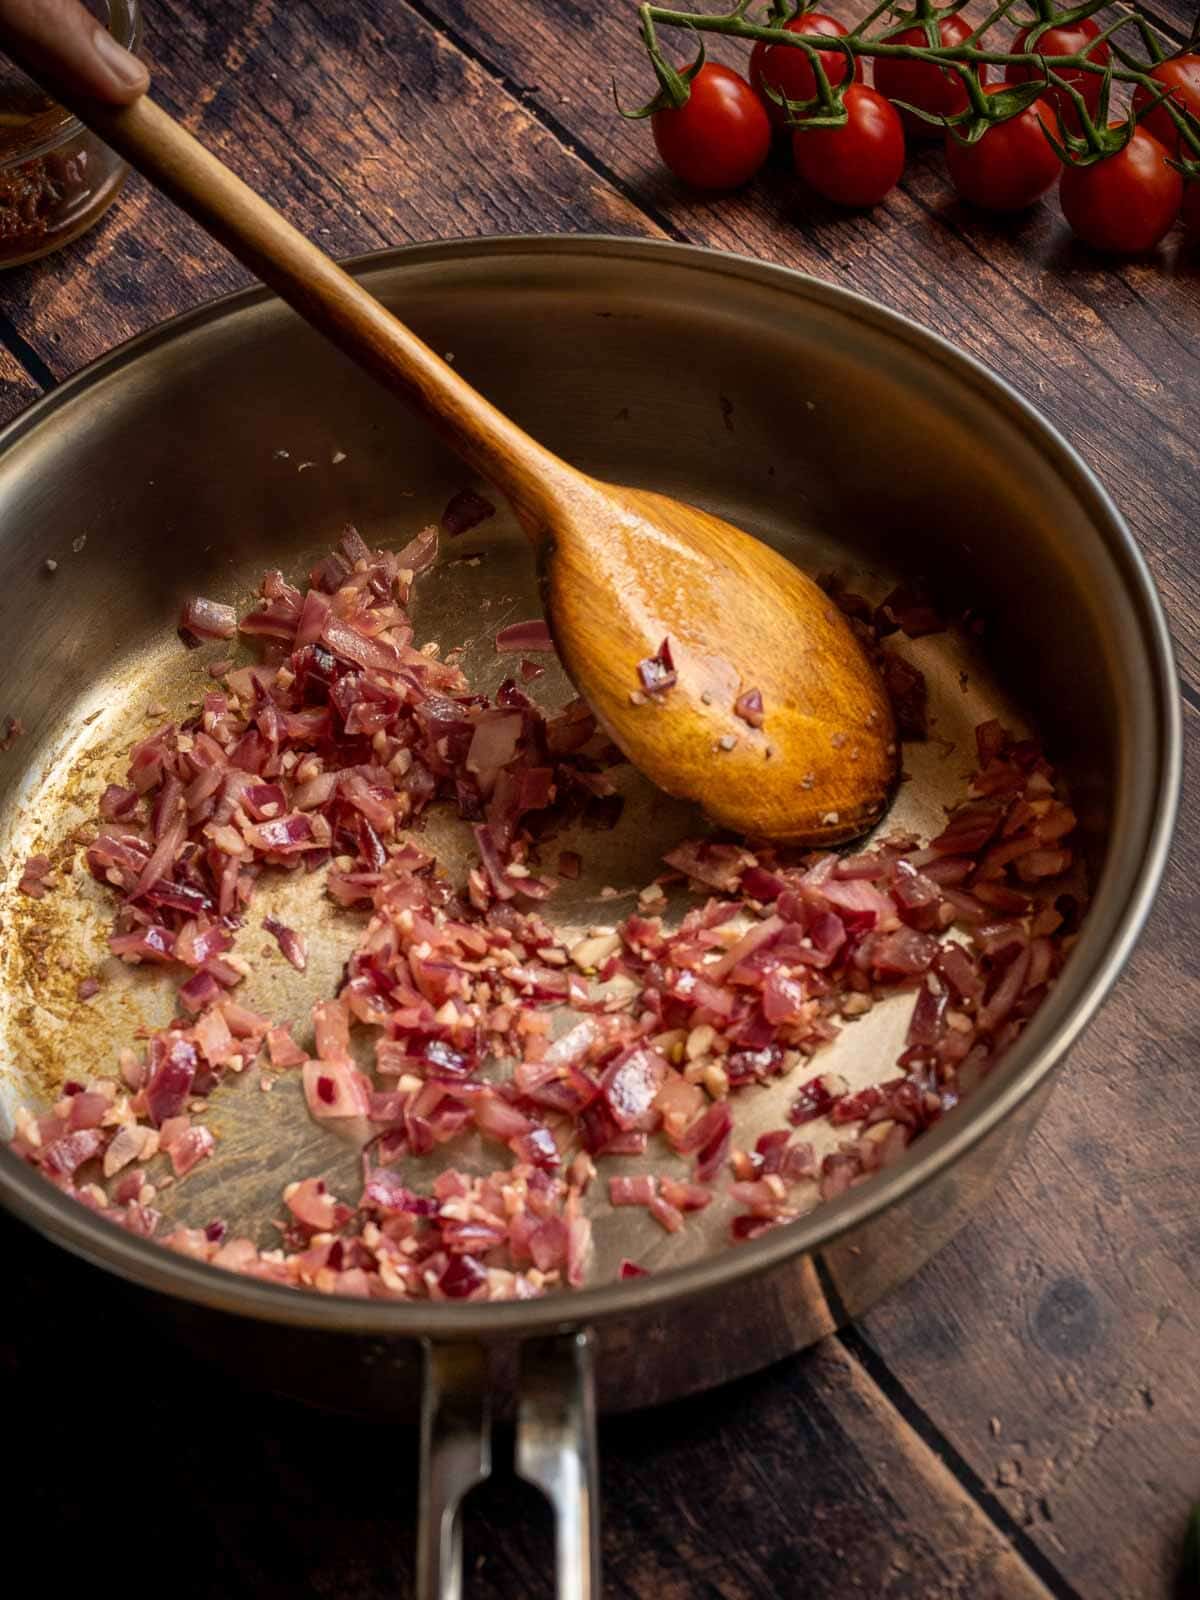 sautéeing onion in a skillet stirring with a wooden spoon.